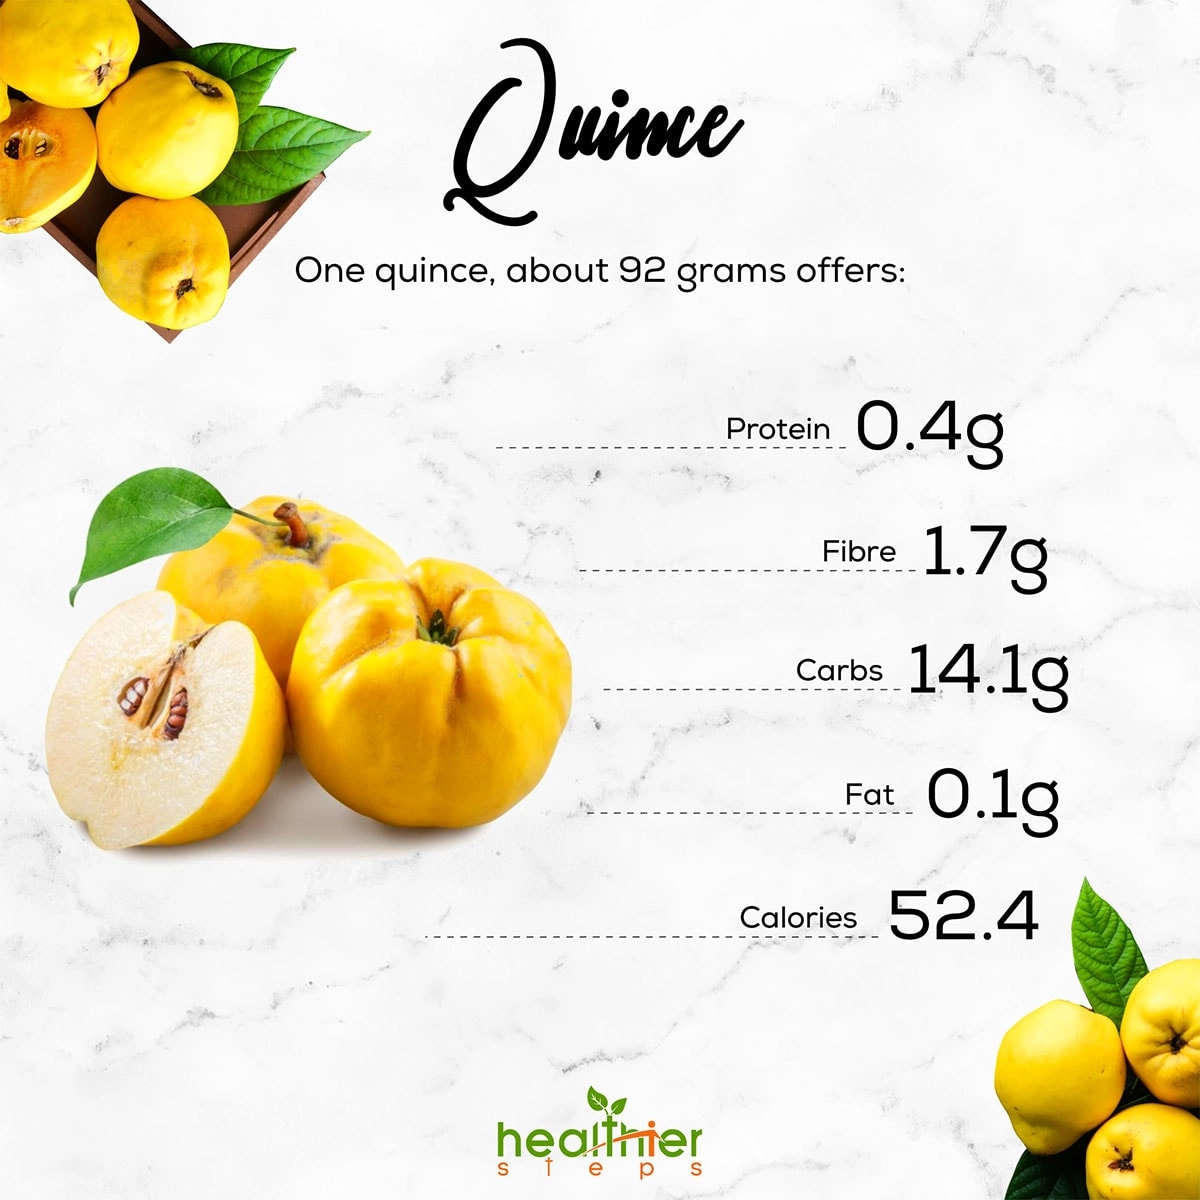 Quince as a Source of Nutrients and Antioxidants